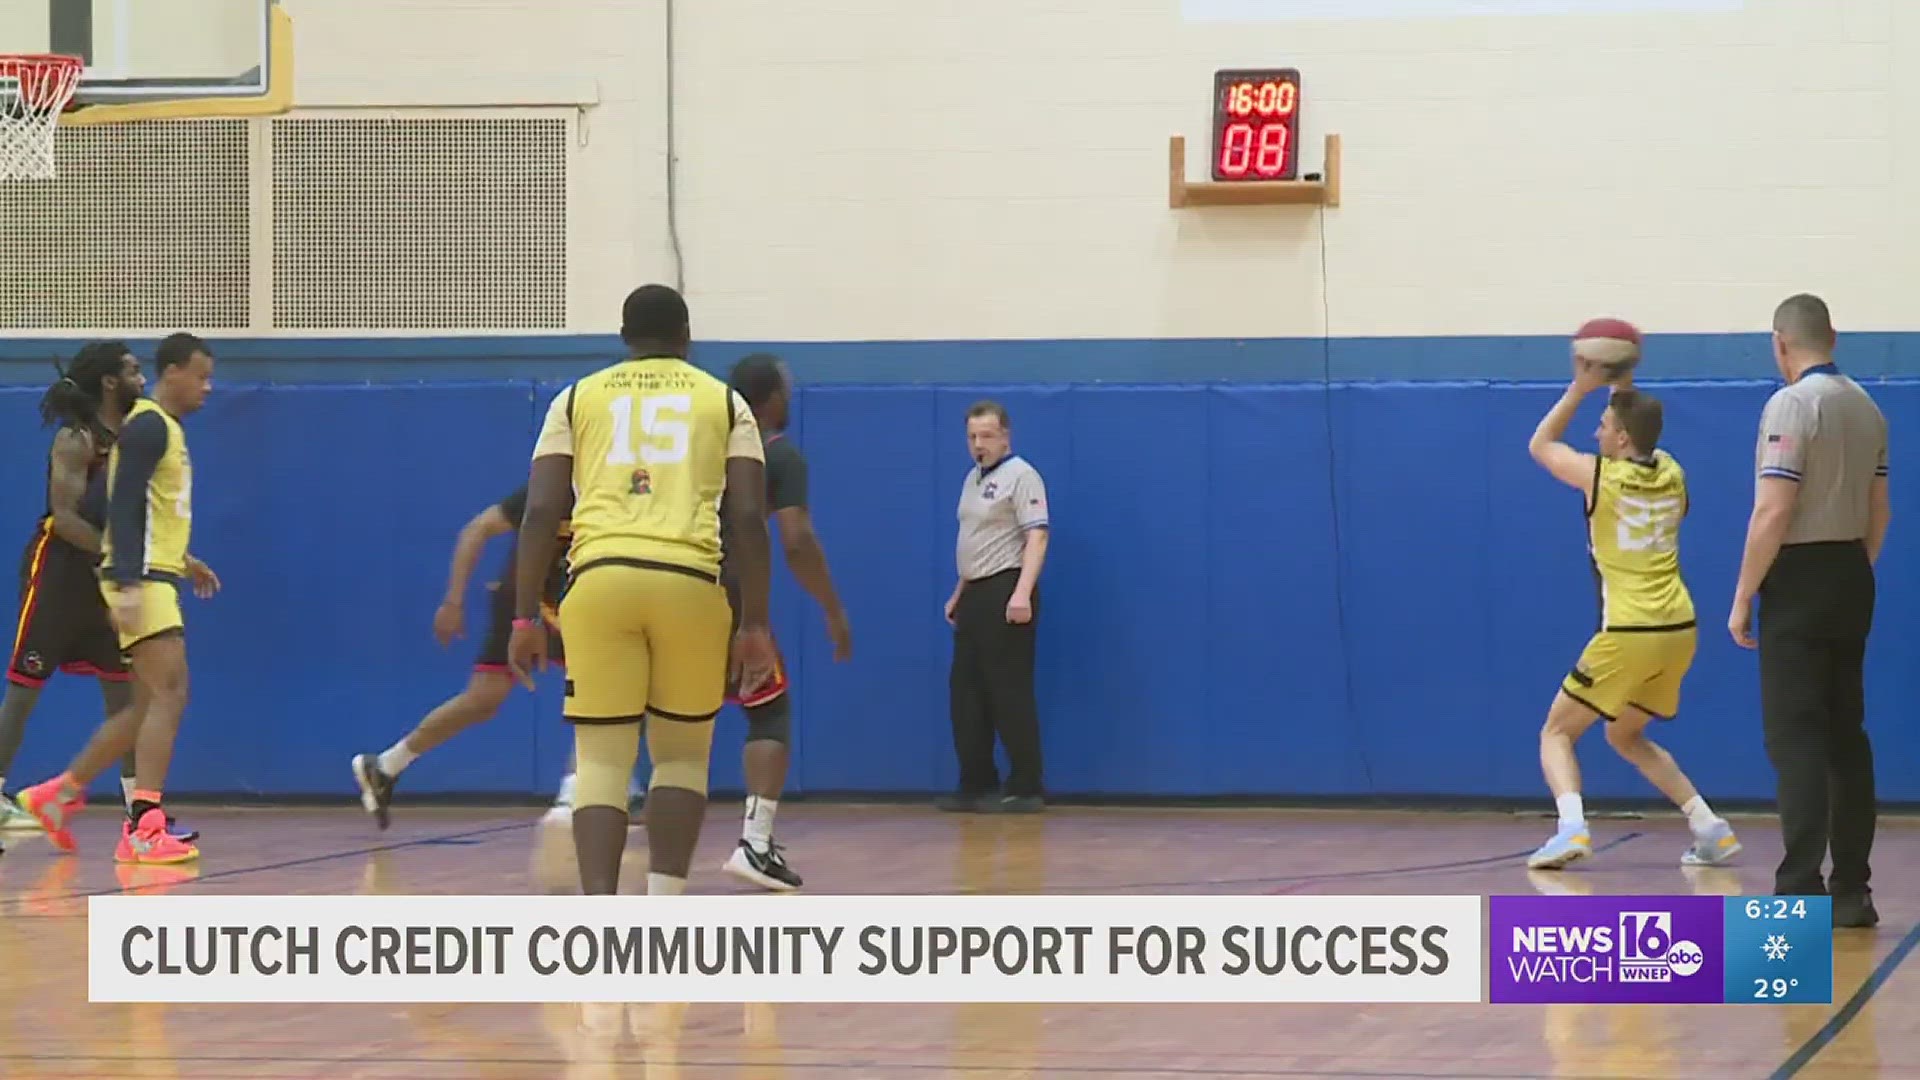 Clutch Credit the Community in Wilkes-Barre for Helping Them Find Success